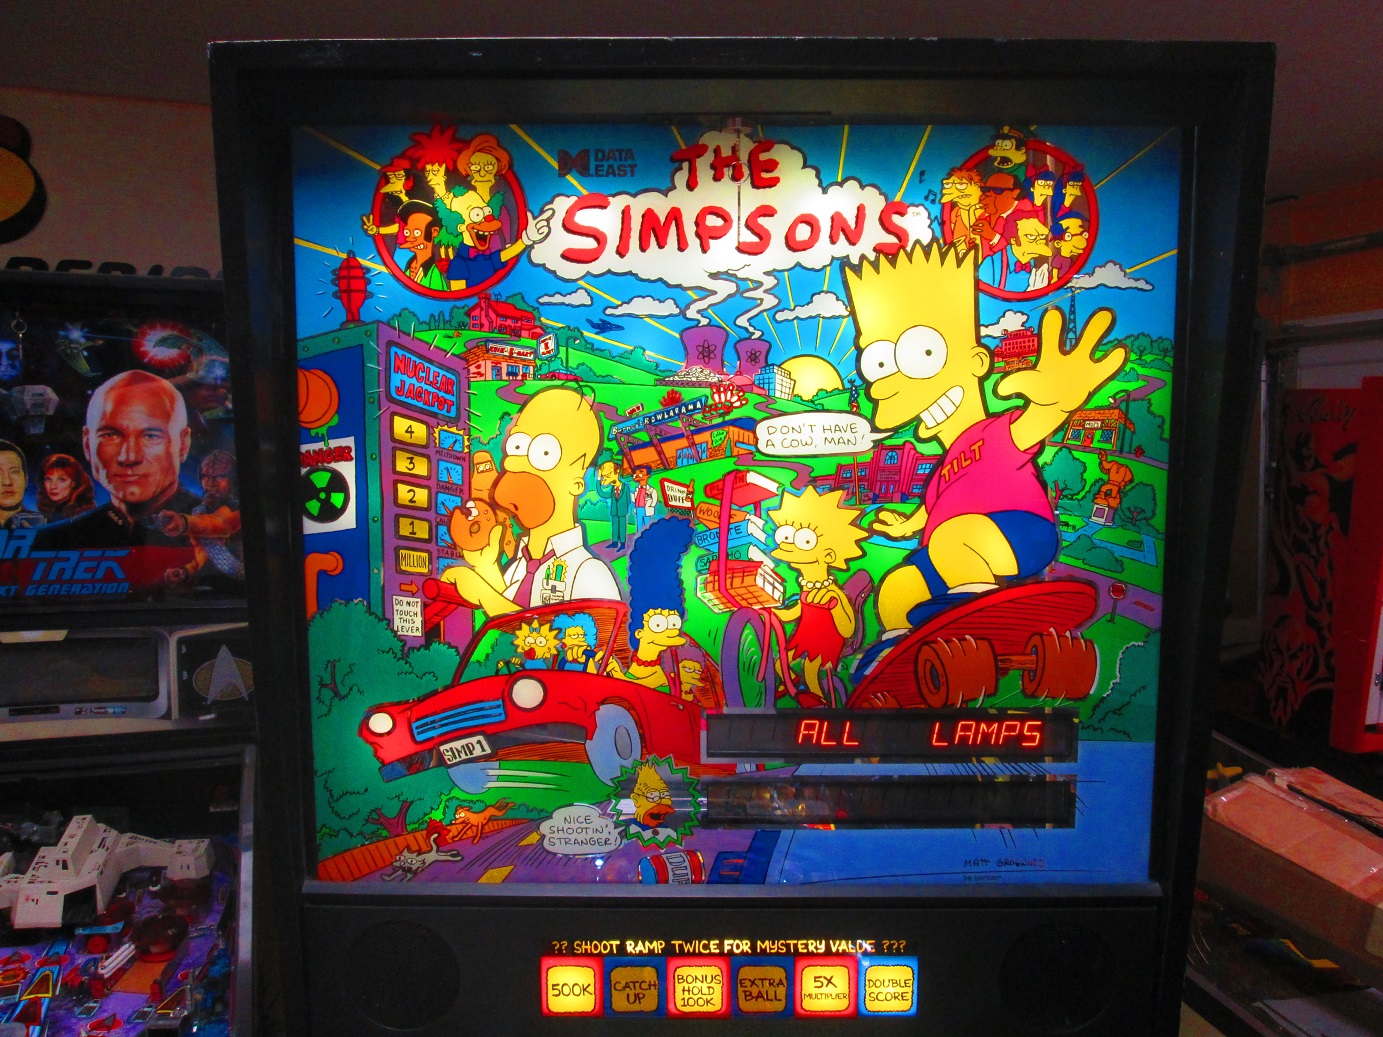 The Simpsons7